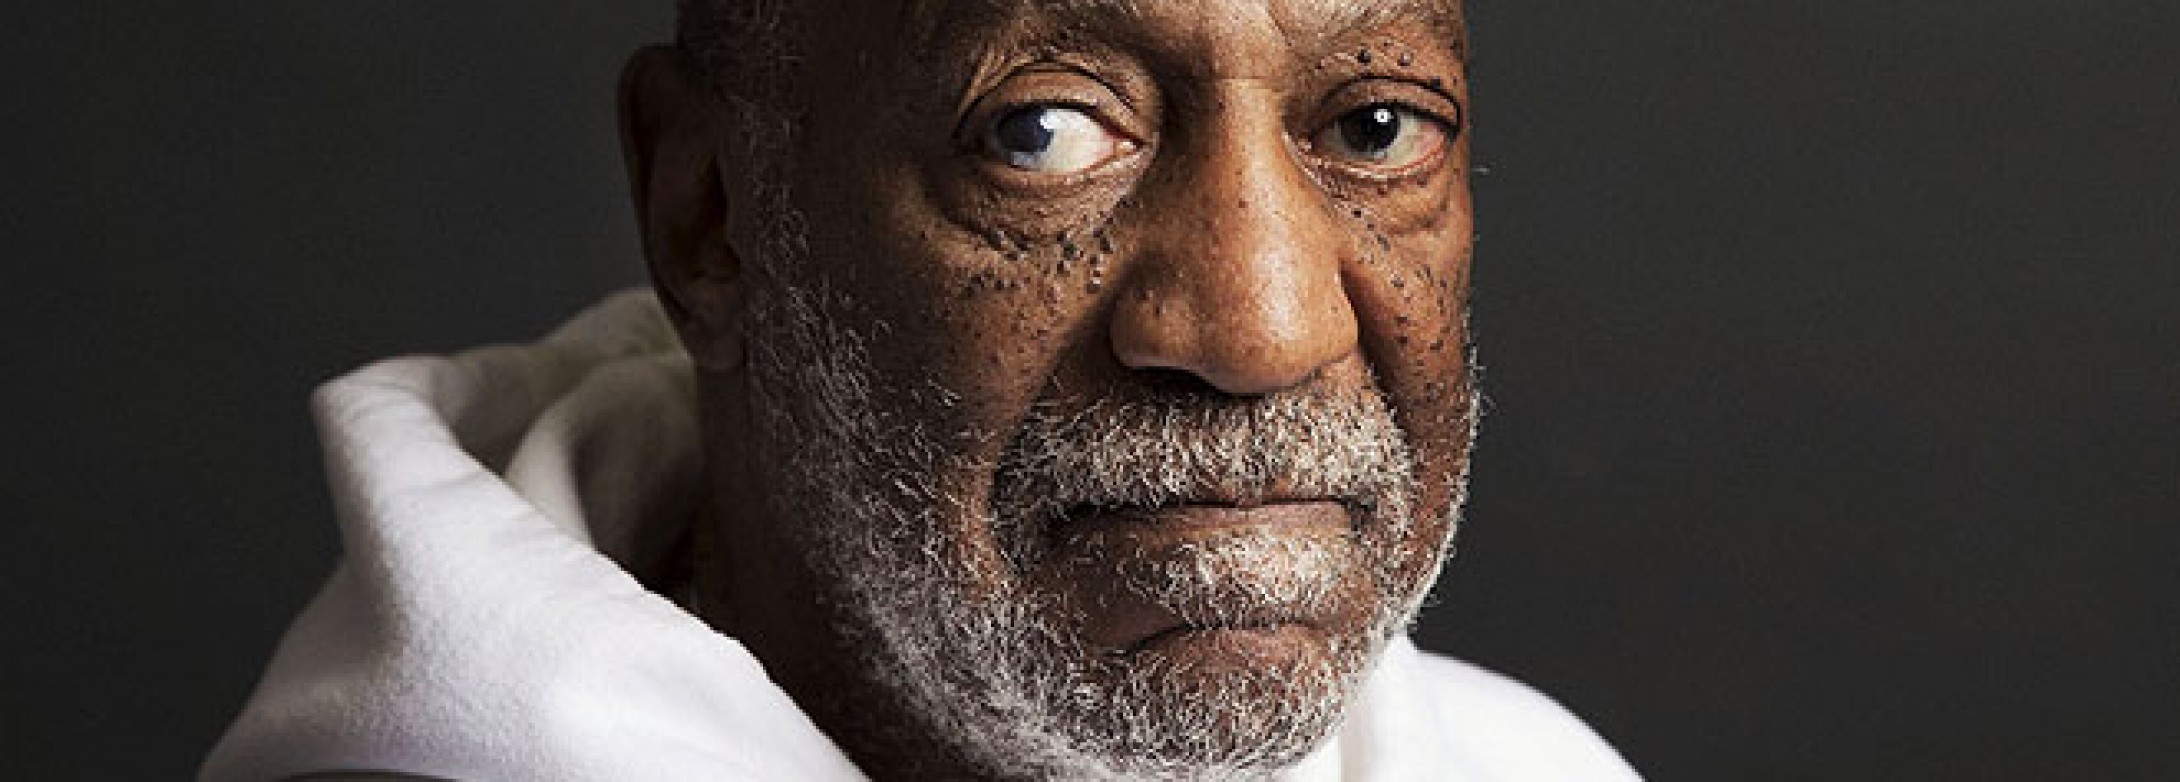 Cosby – A Shattered and Disgraced Brand